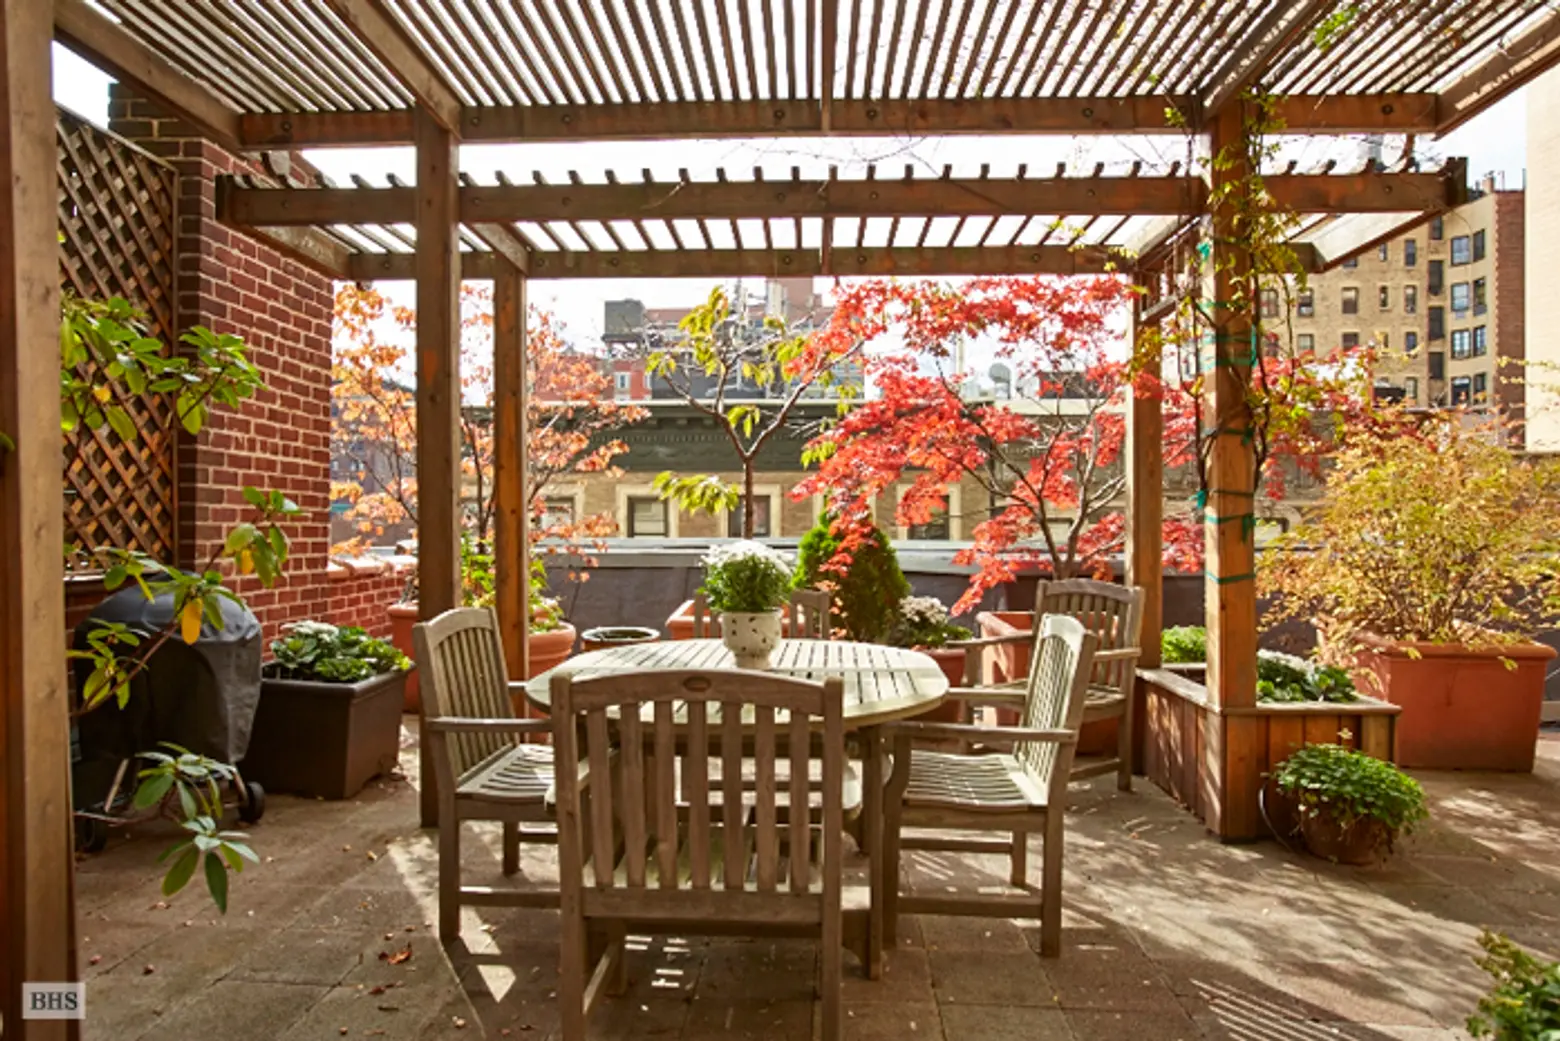 255 West 92nd Street, irrigated rooftop terrace with pergola, country chic renovation